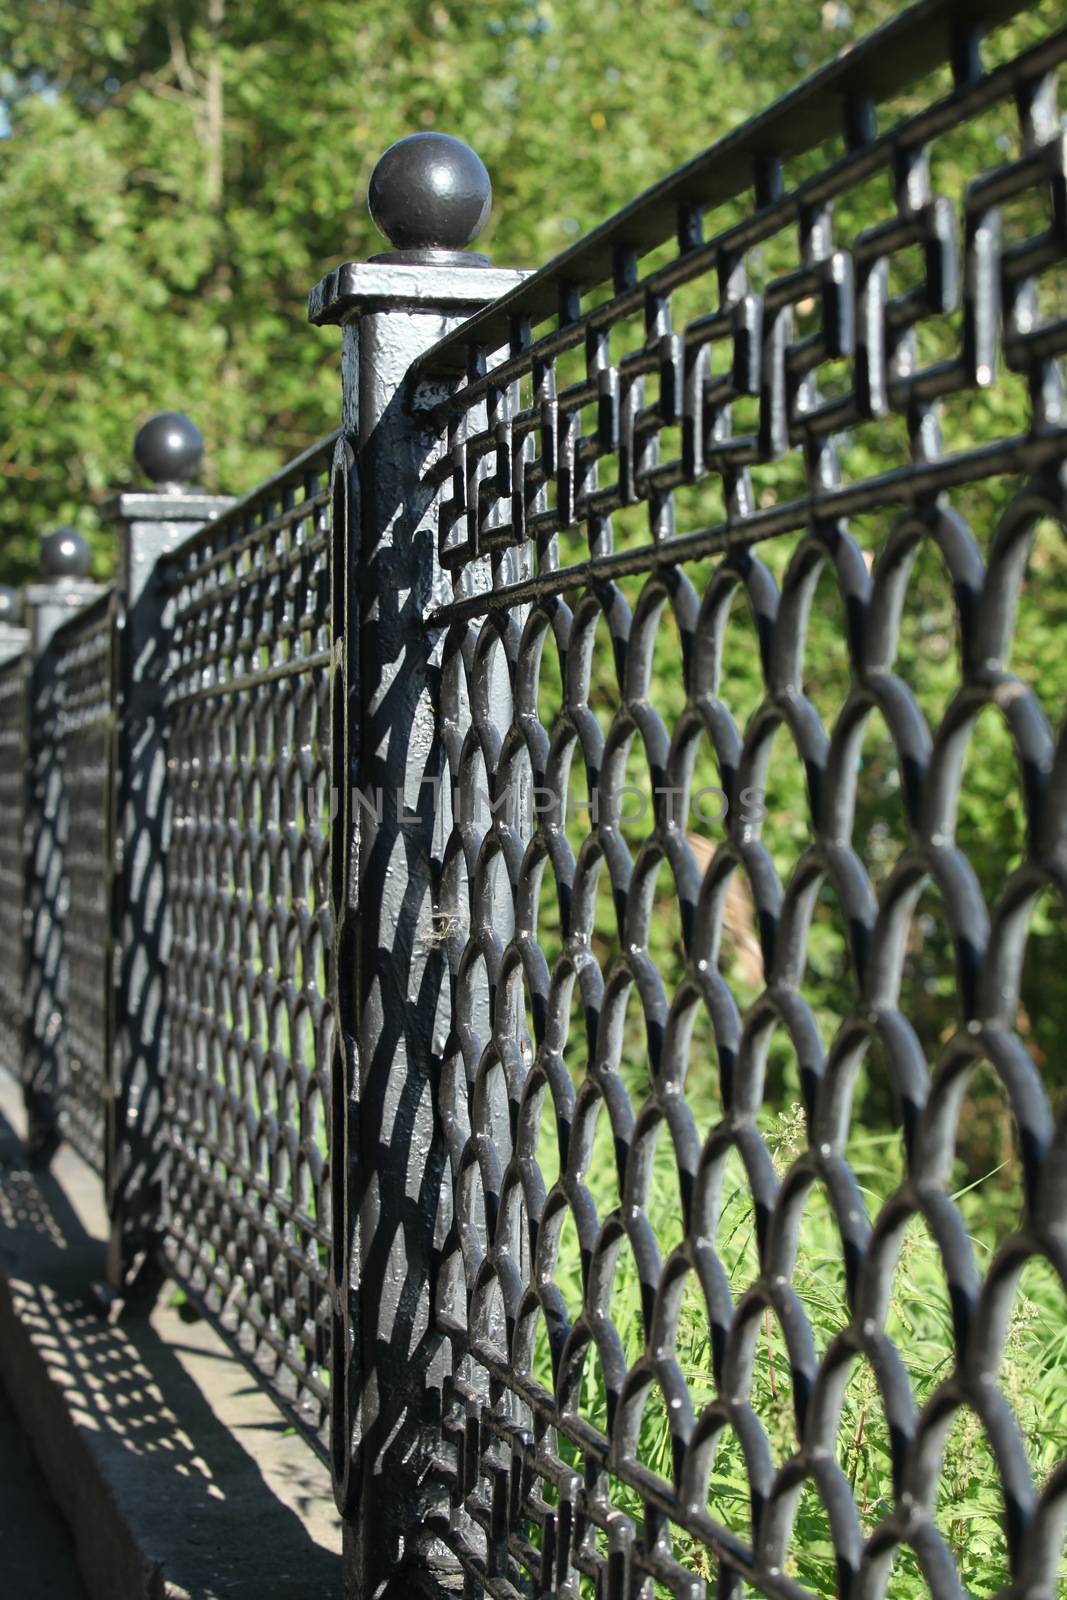 patterned cast iron fence